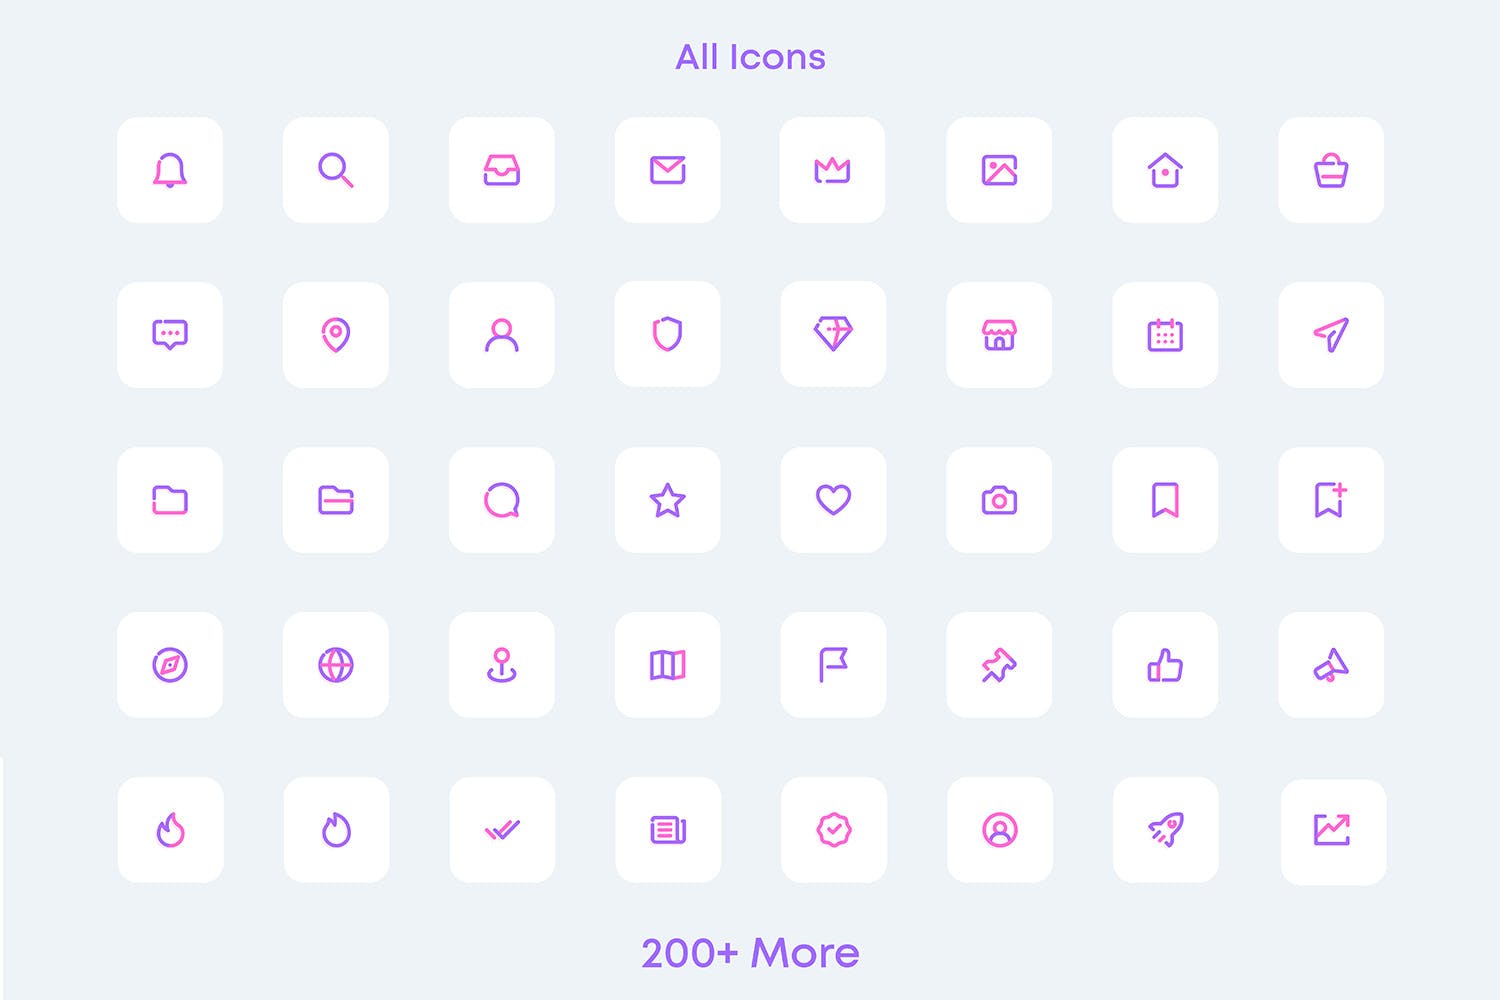 Web网站/APP应用UI设计图标素材包 Complete Web and Mobile UI Icons Pack插图5